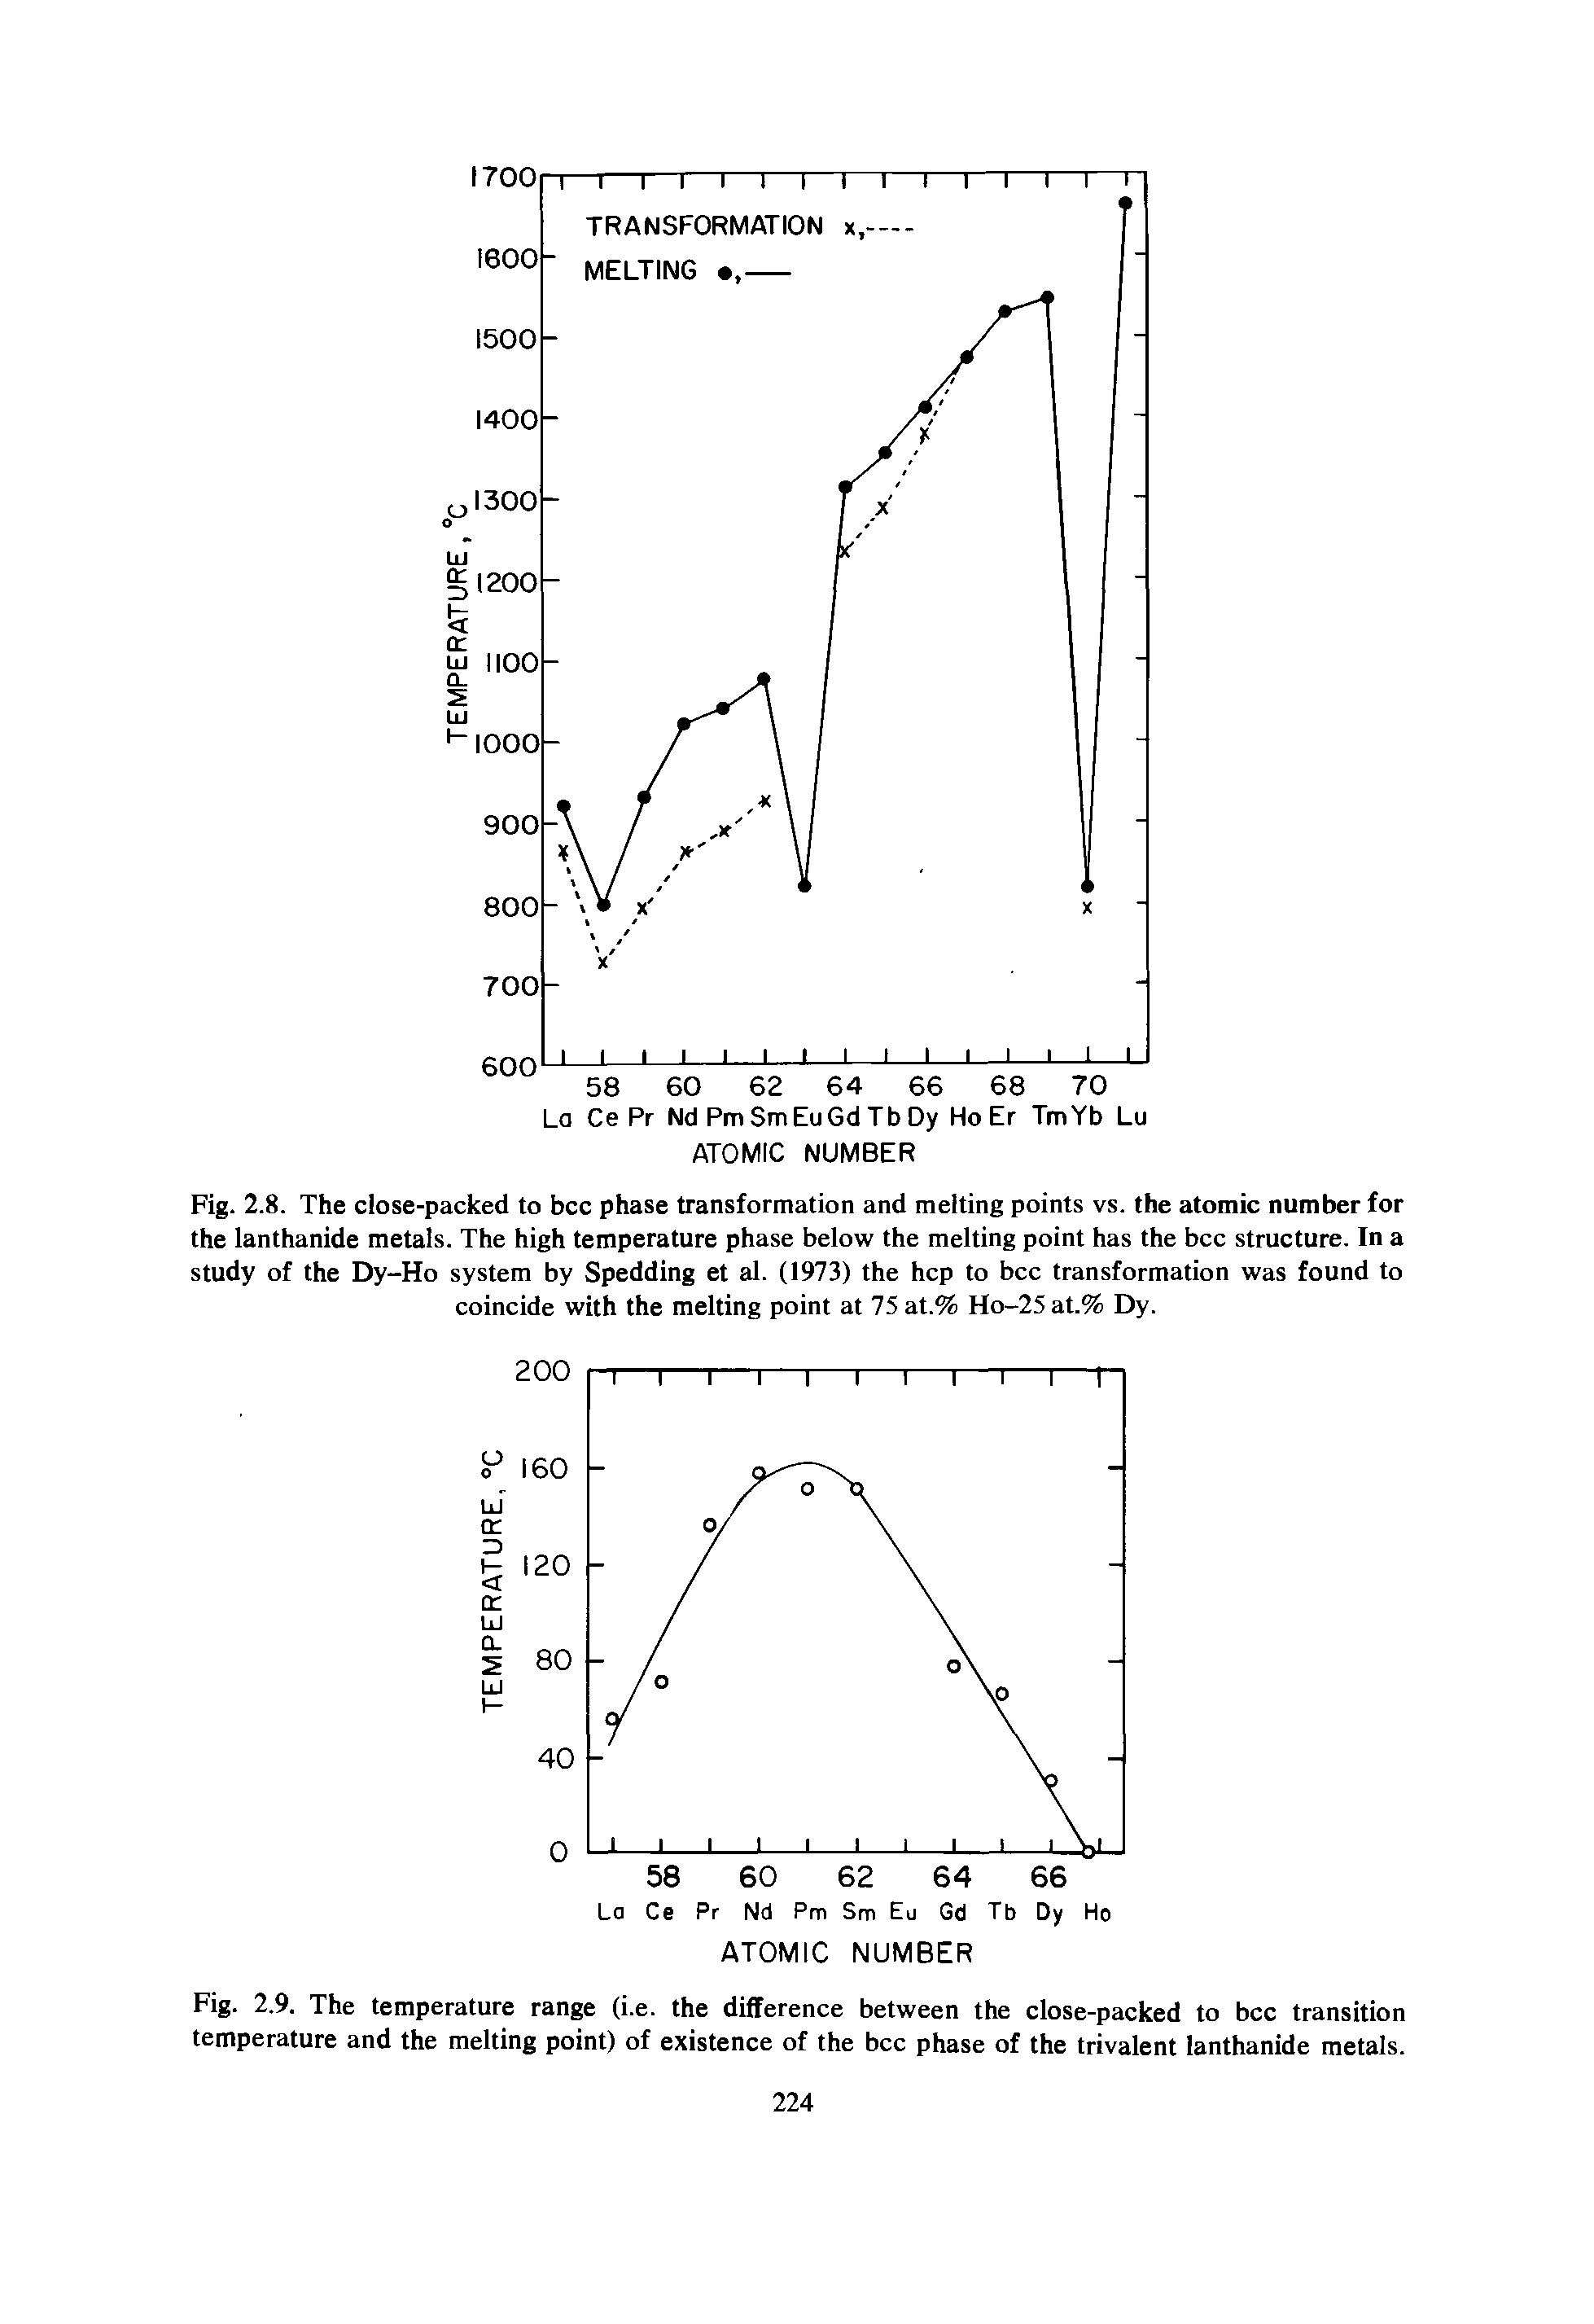 Fig. 2.8. The close-packed to bcc phase transformation and melting points vs. the atomic number for the lanthanide metals. The high temperature phase below the melting point has the bcc structure. In a study of the Dy-Ho system by Spedding et al. (1973) the hep to bcc transformation was found to coincide with the melting point at 75 at.% Ho-25 at.% Dy.